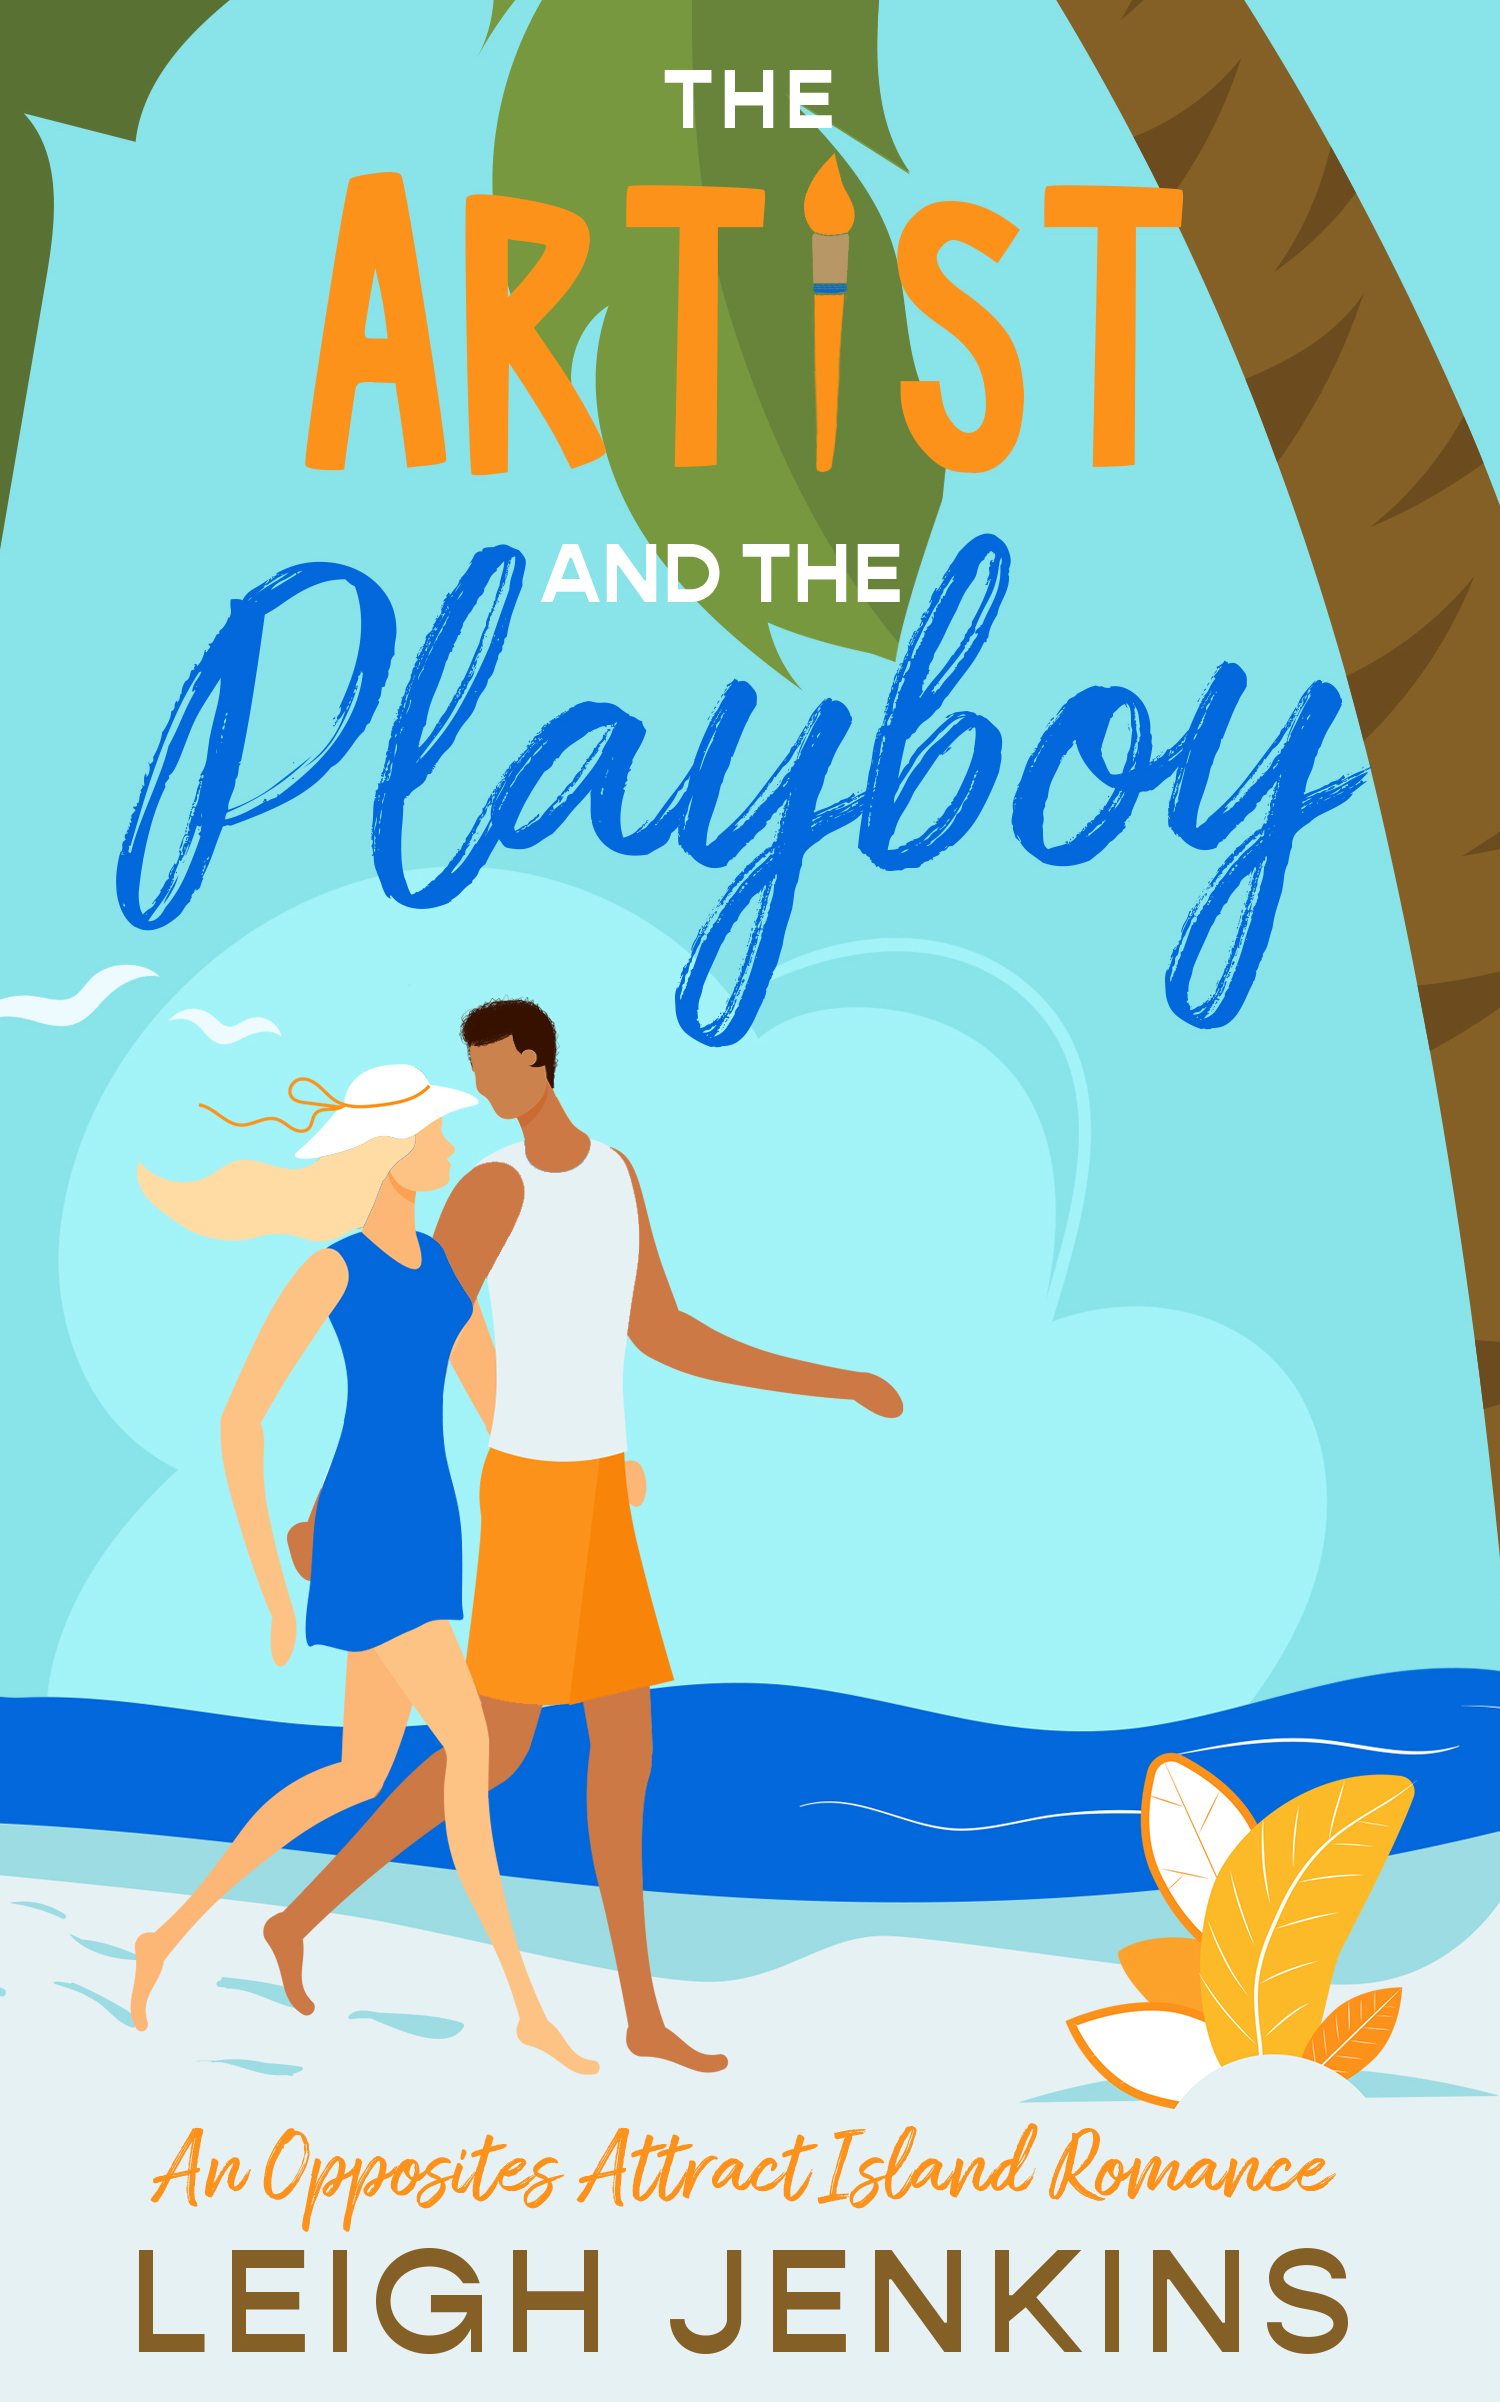 The Artist and the Playboy by Leigh Jenkins PDF Download